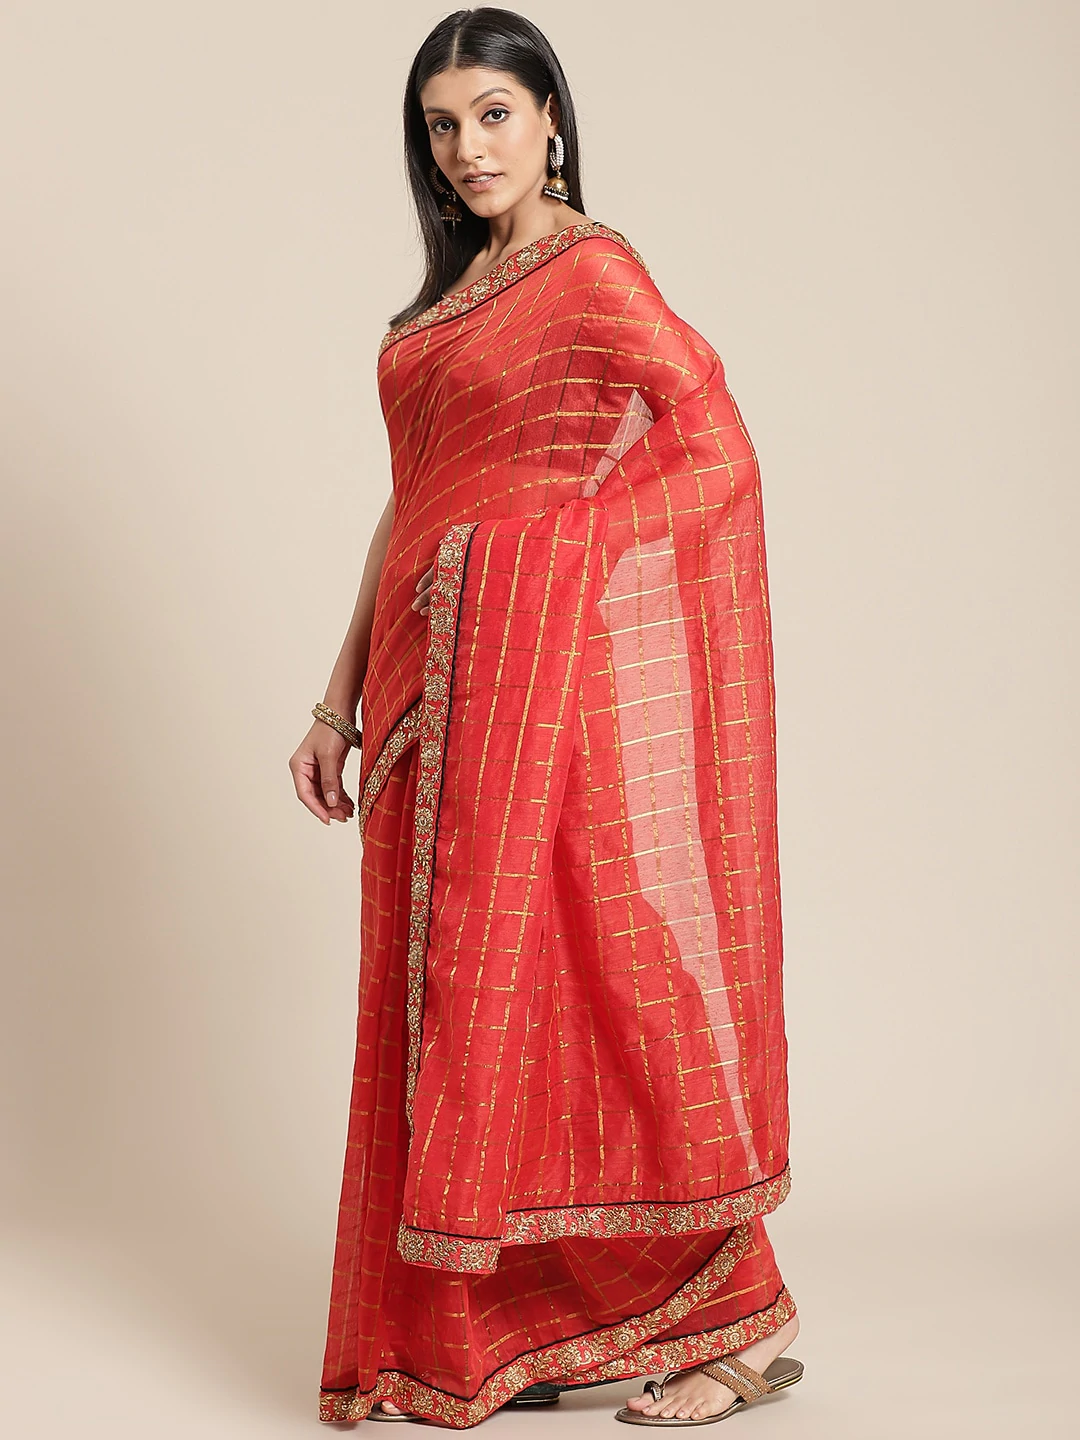 Red Gharchola Saree With Kundan Embroidery Border & Contrast Green Embellished Blouse